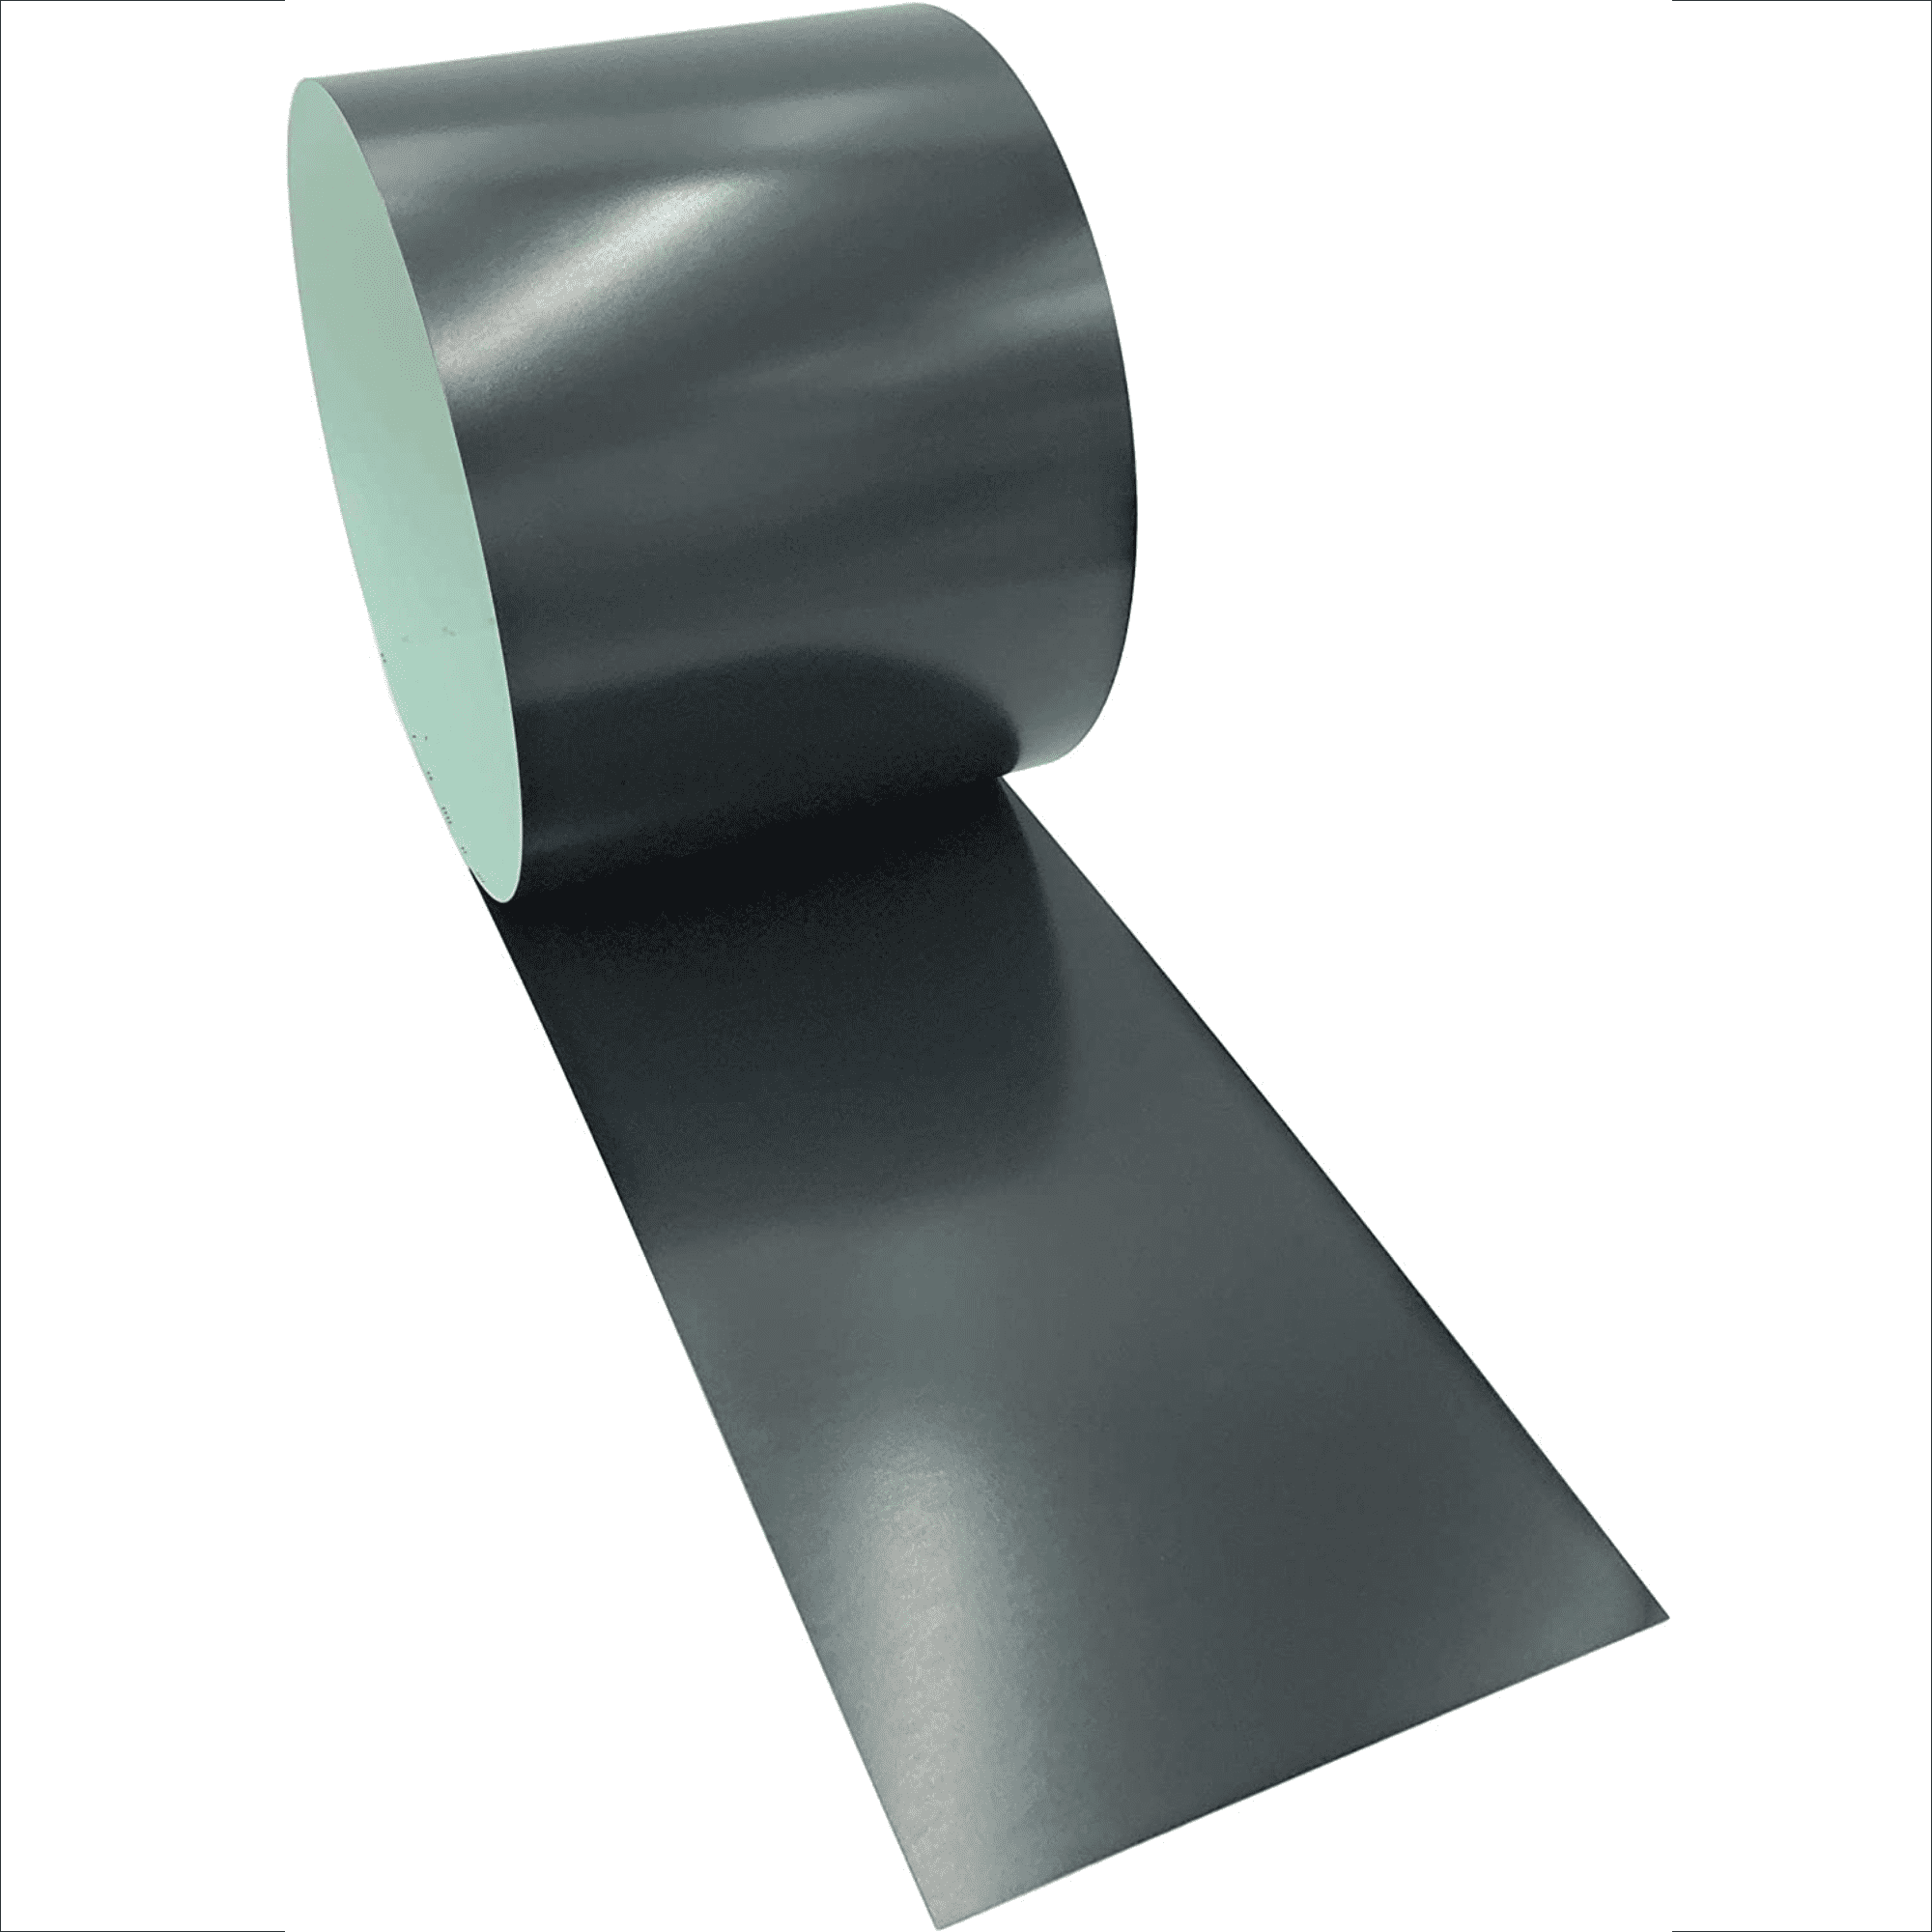 EAGLE 1: Heavy Duty 22 Gauge Aluminum Flashing Rolls - 15 Inches Wide x 10  Feet Long General Use, Roofing Flashing, DIY or Contractors (Multiple Sizes  in Listing) (1 Roll, Black) 